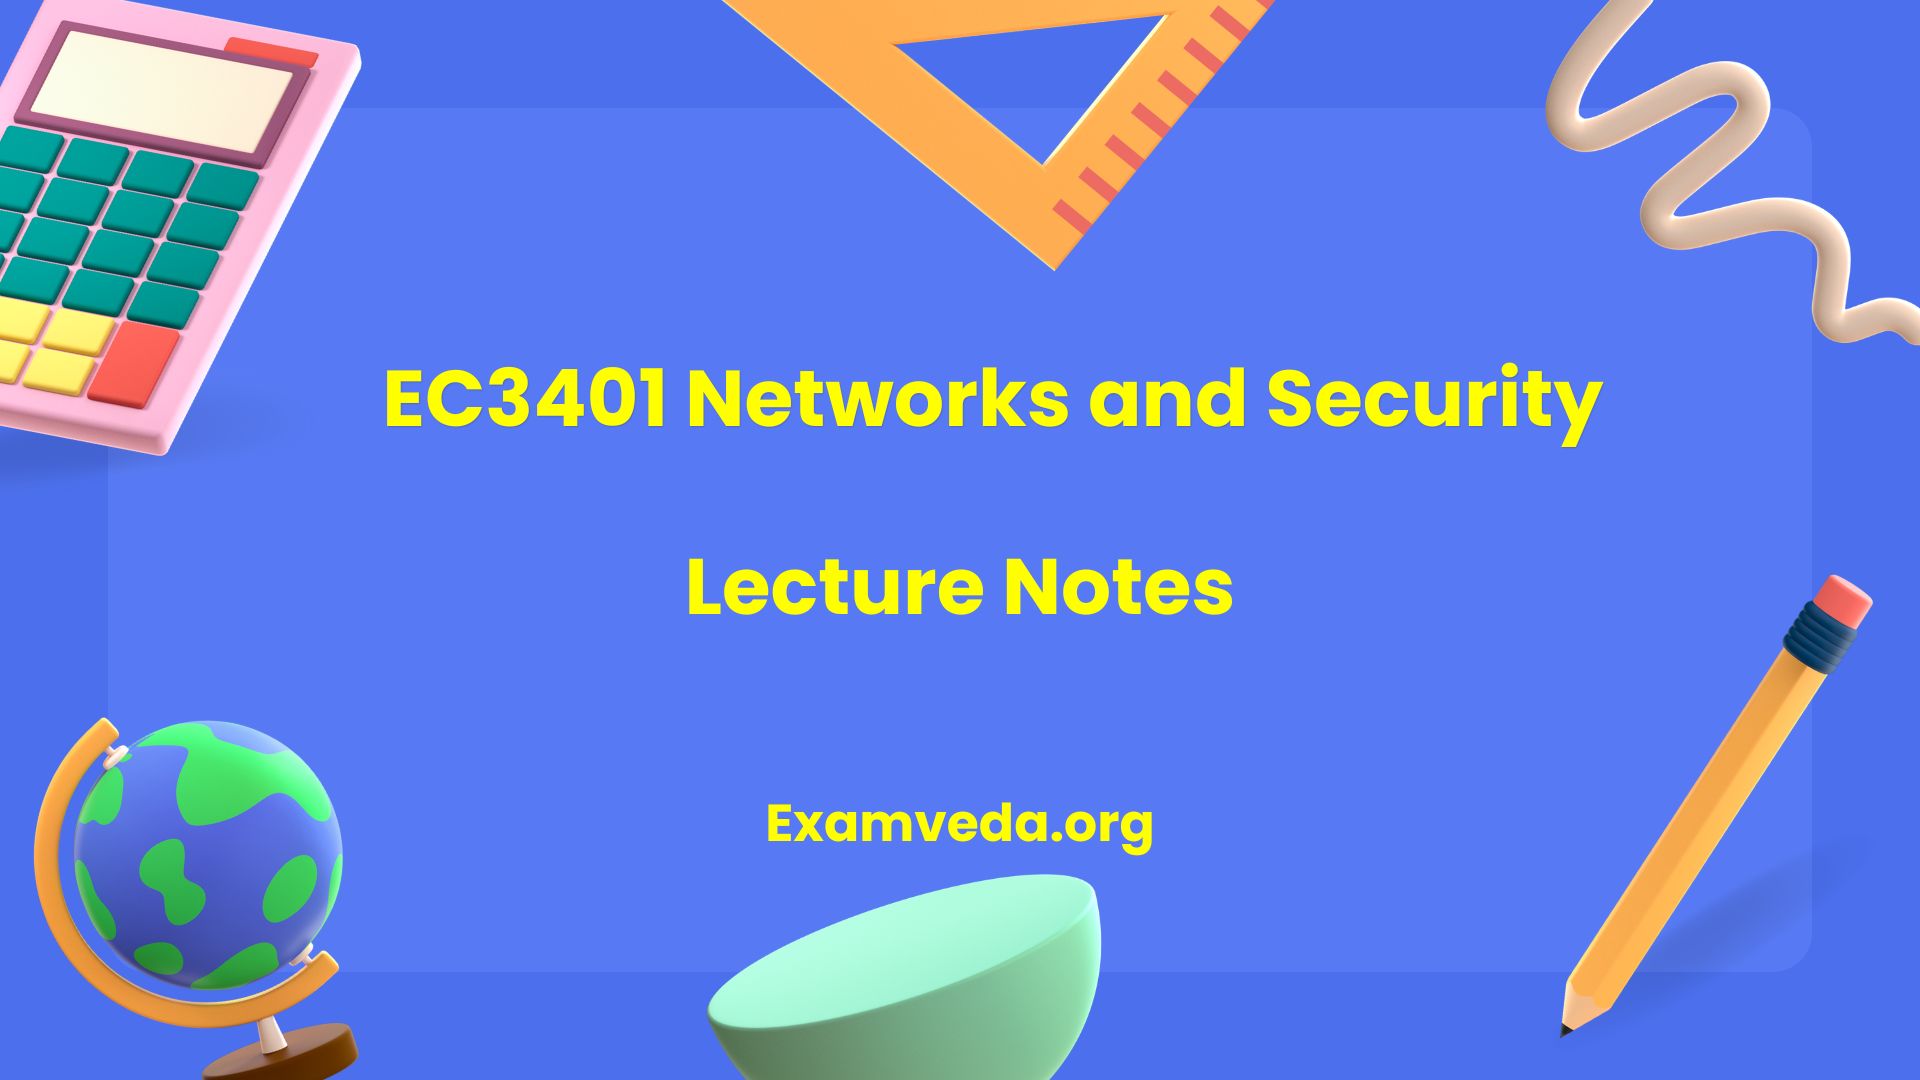 EC3401 Networks and Security Lecture Notes